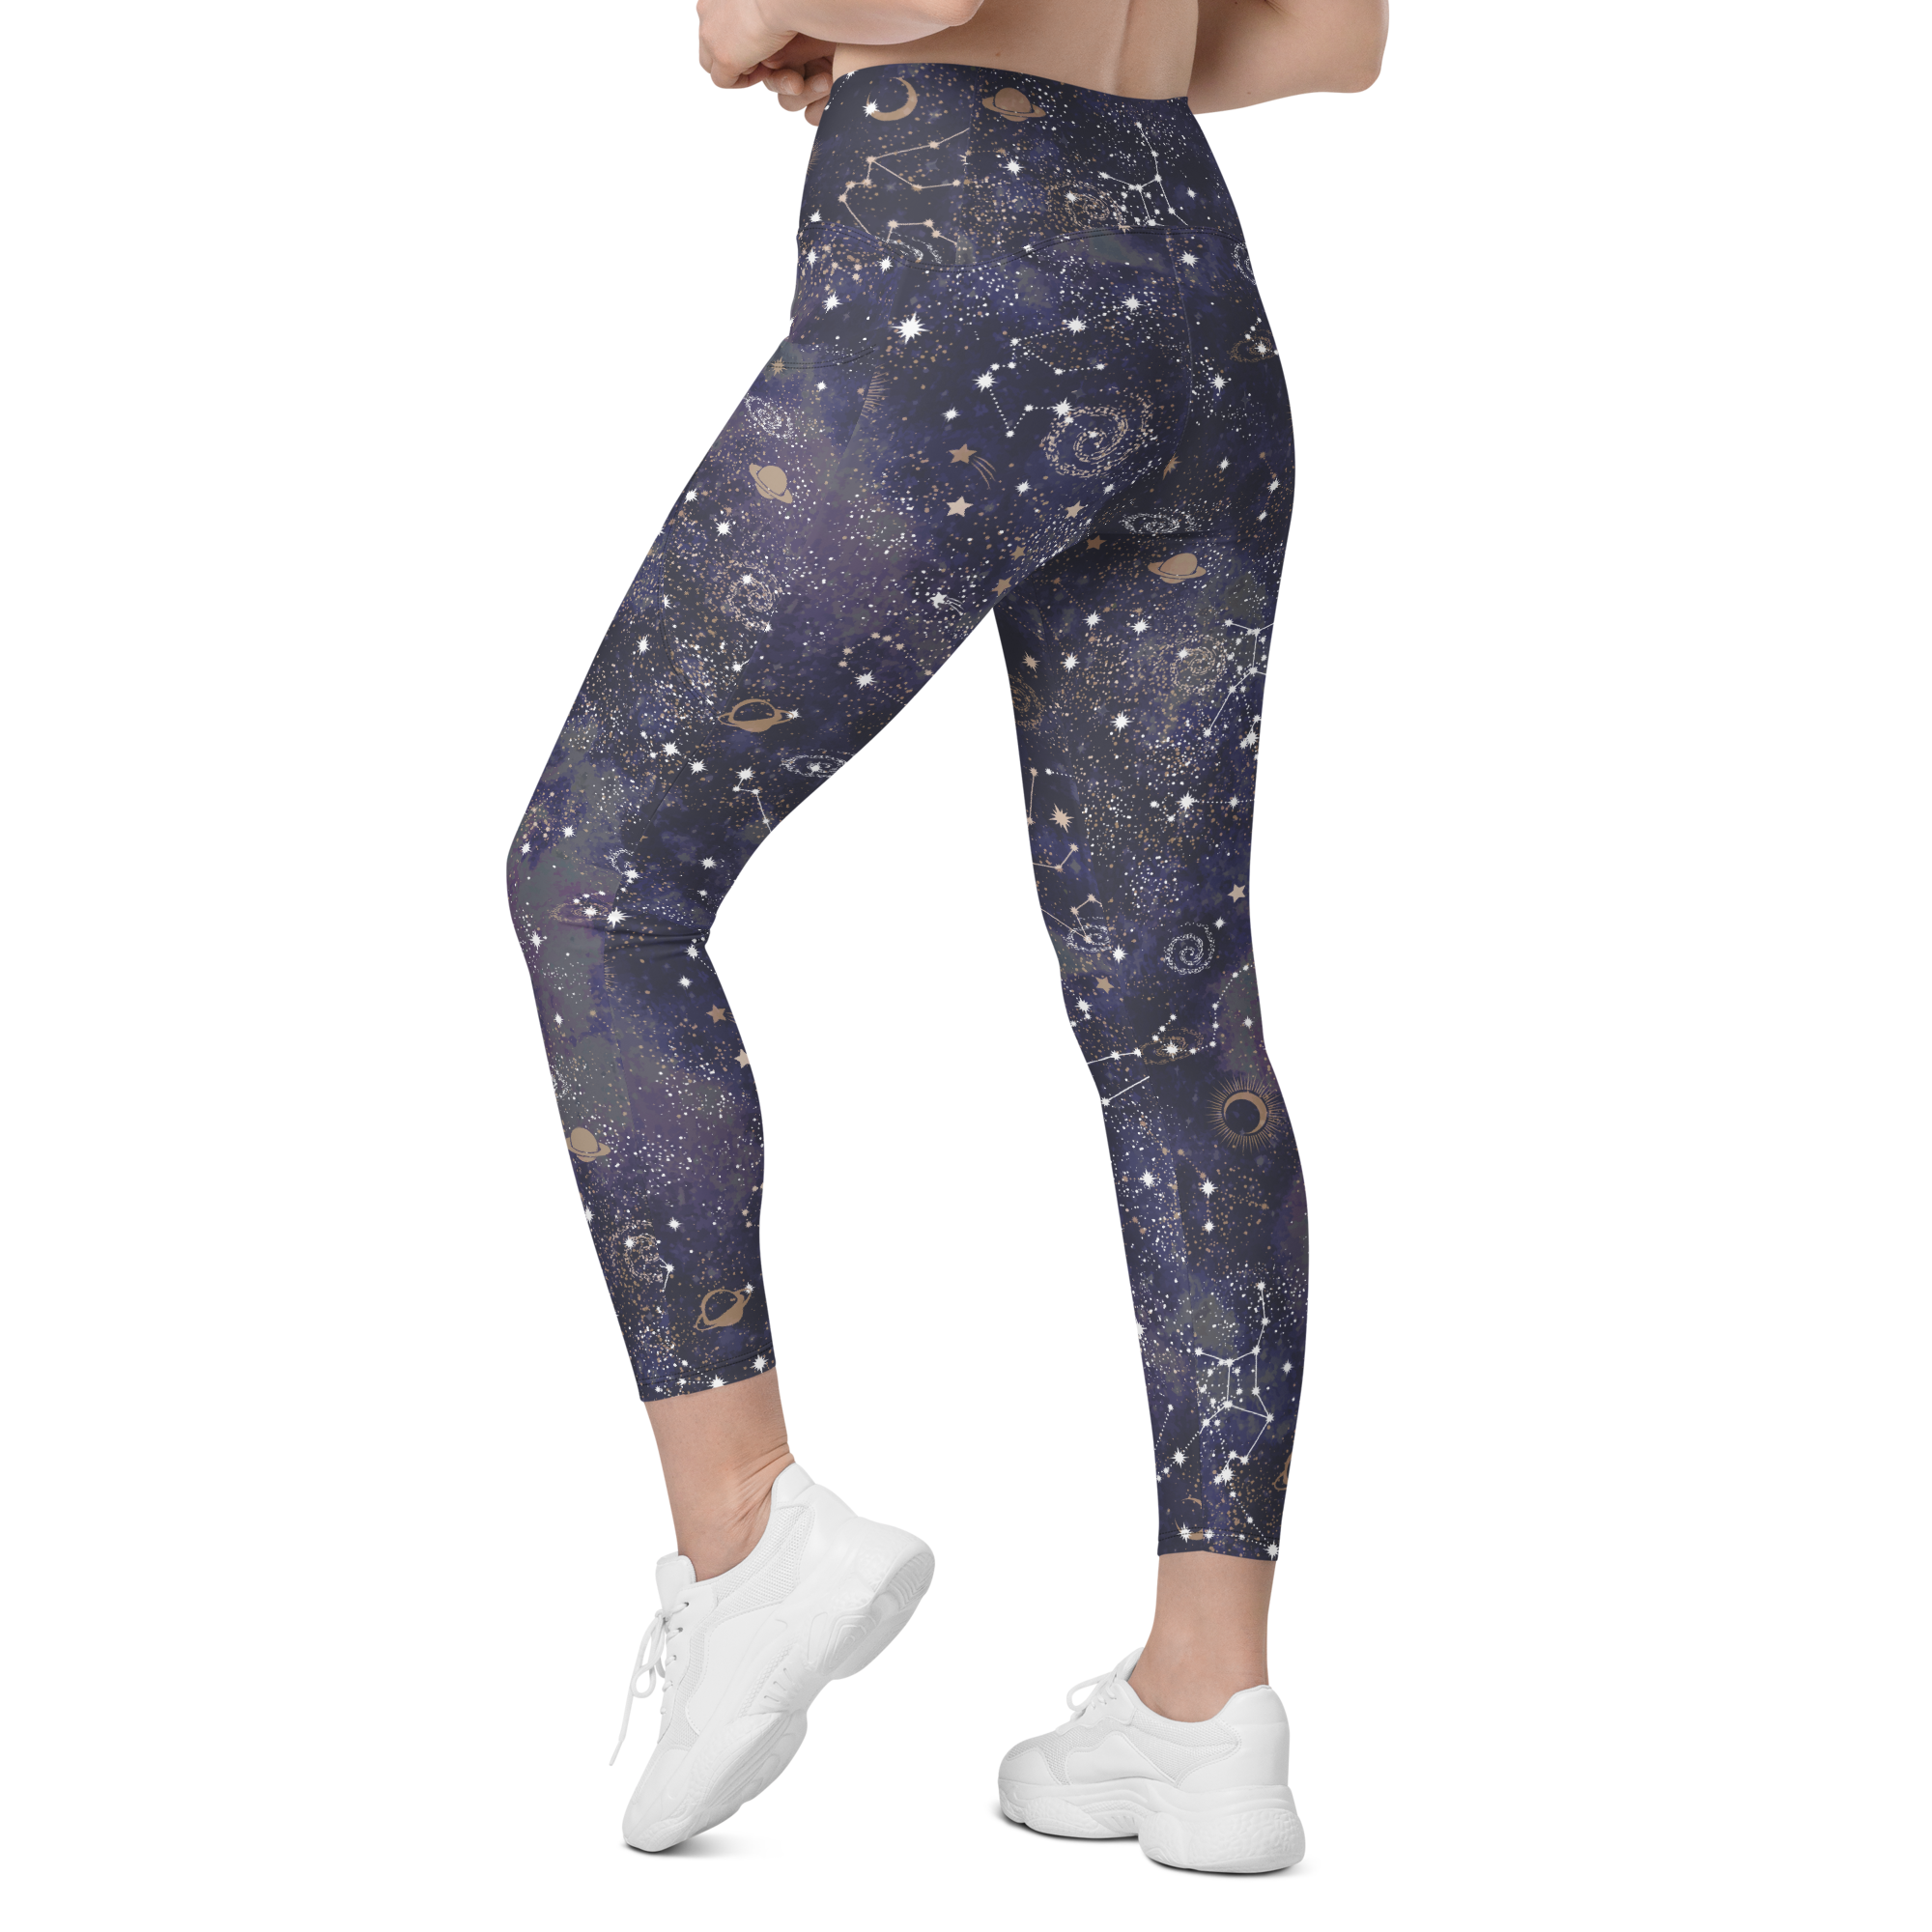 Just Dropped! Chakra 2 Leggings with pockets